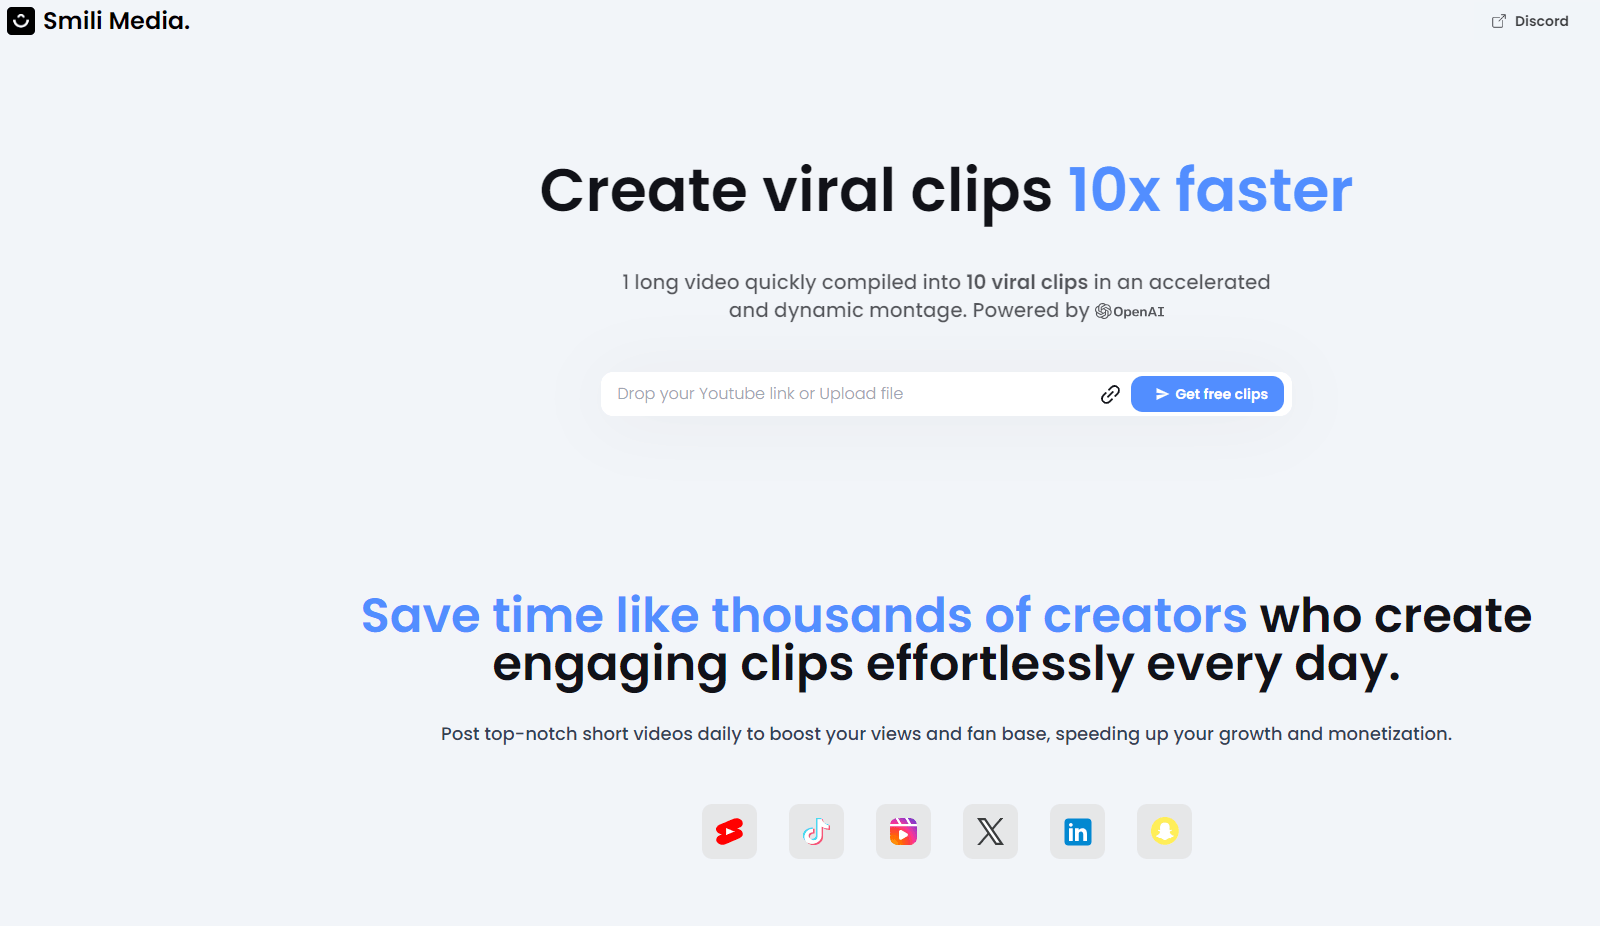 Want to create viral video clips?